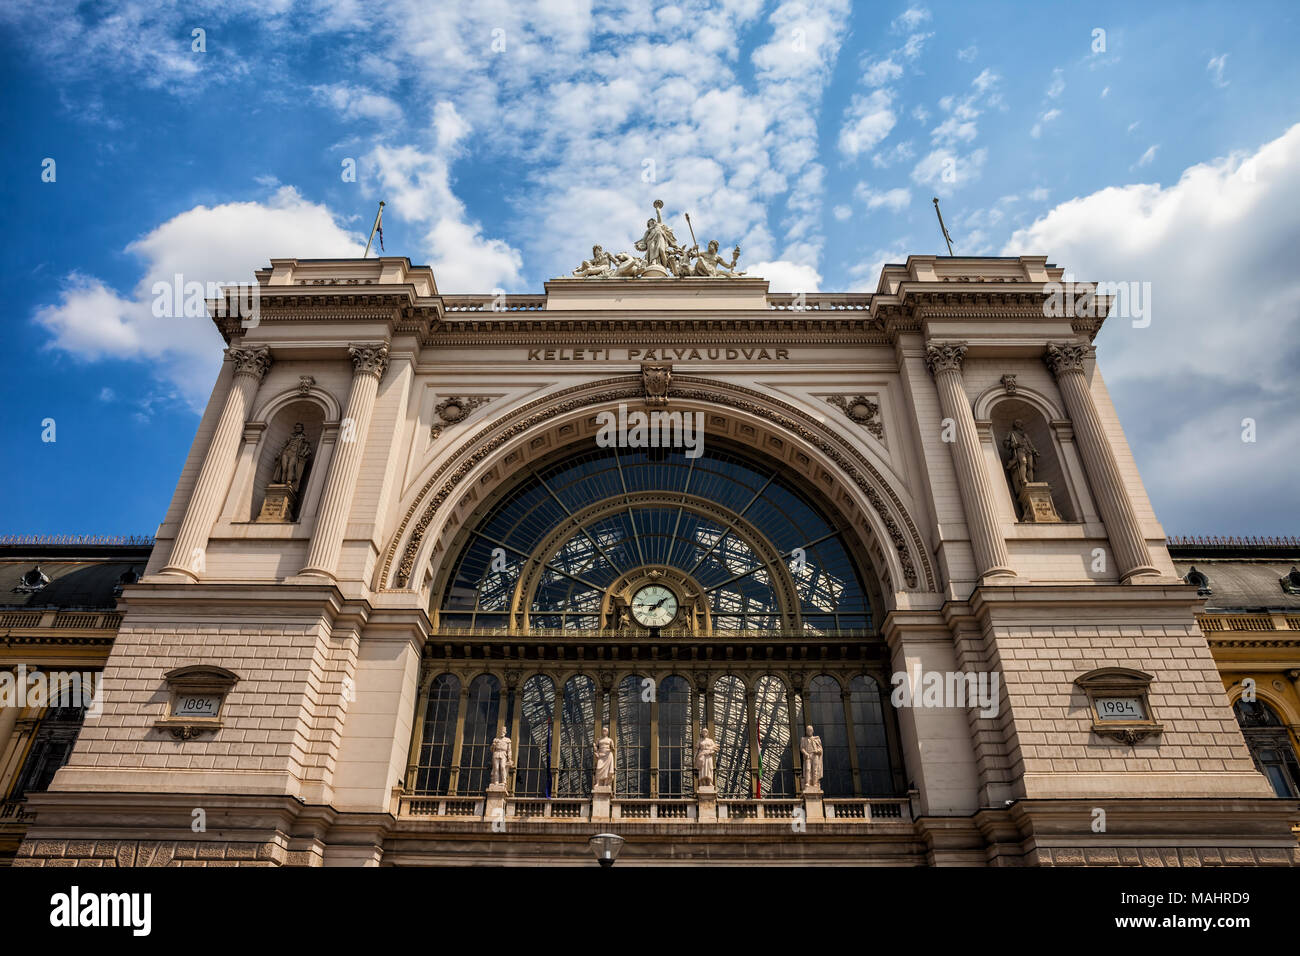 Keleti Railway Station in city of Budapest, Hungary, eclectic style 19th century building. Stock Photo